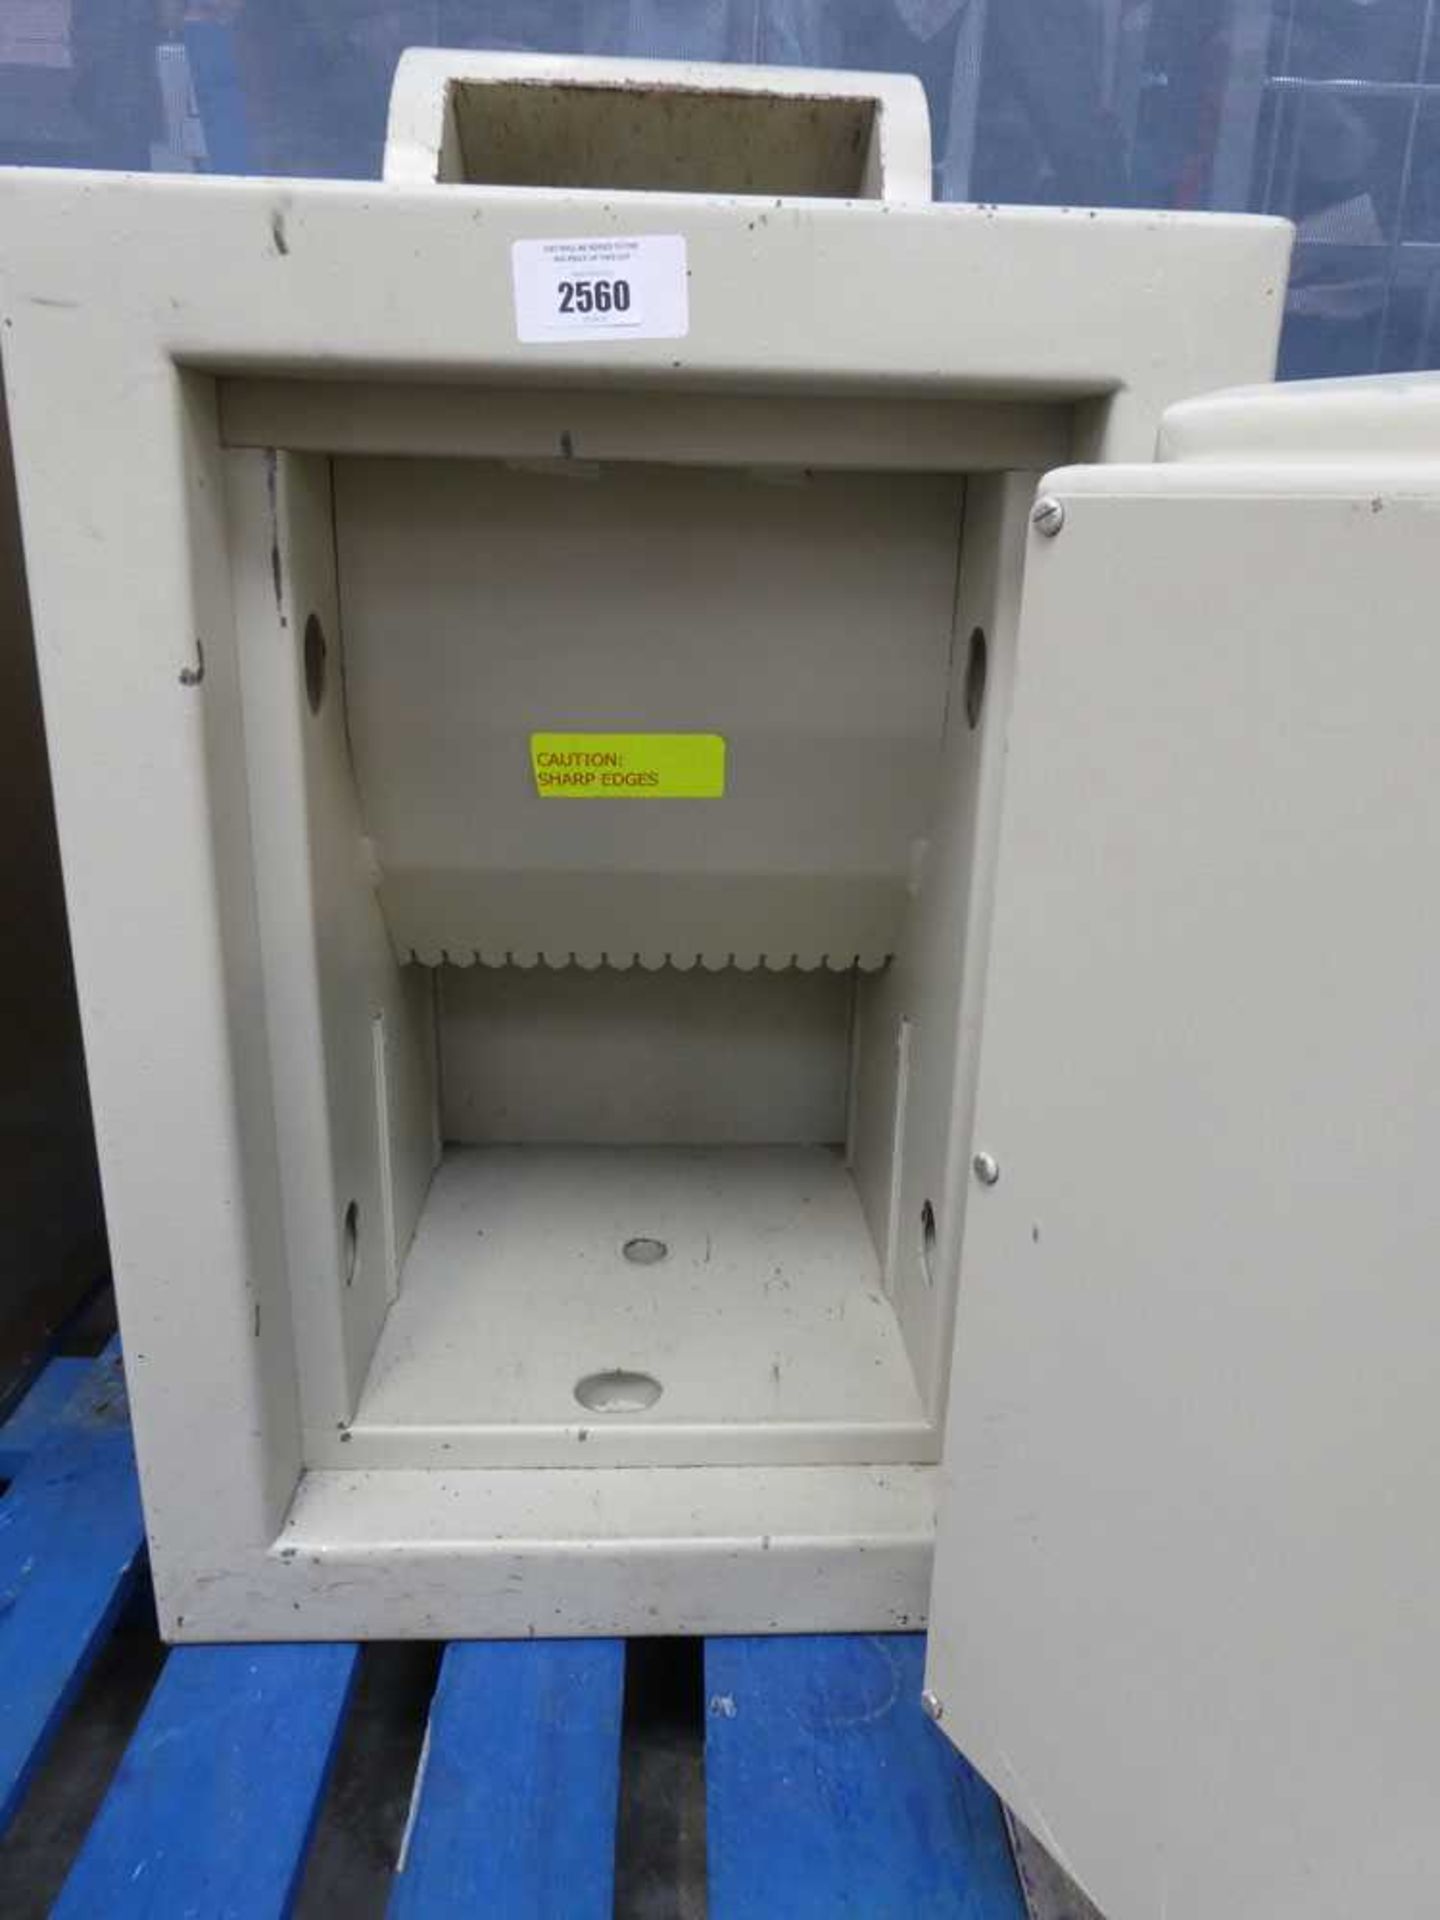 +VAT Dudley heavy duty safe with integrated cash drop and 2 keys - Image 2 of 2